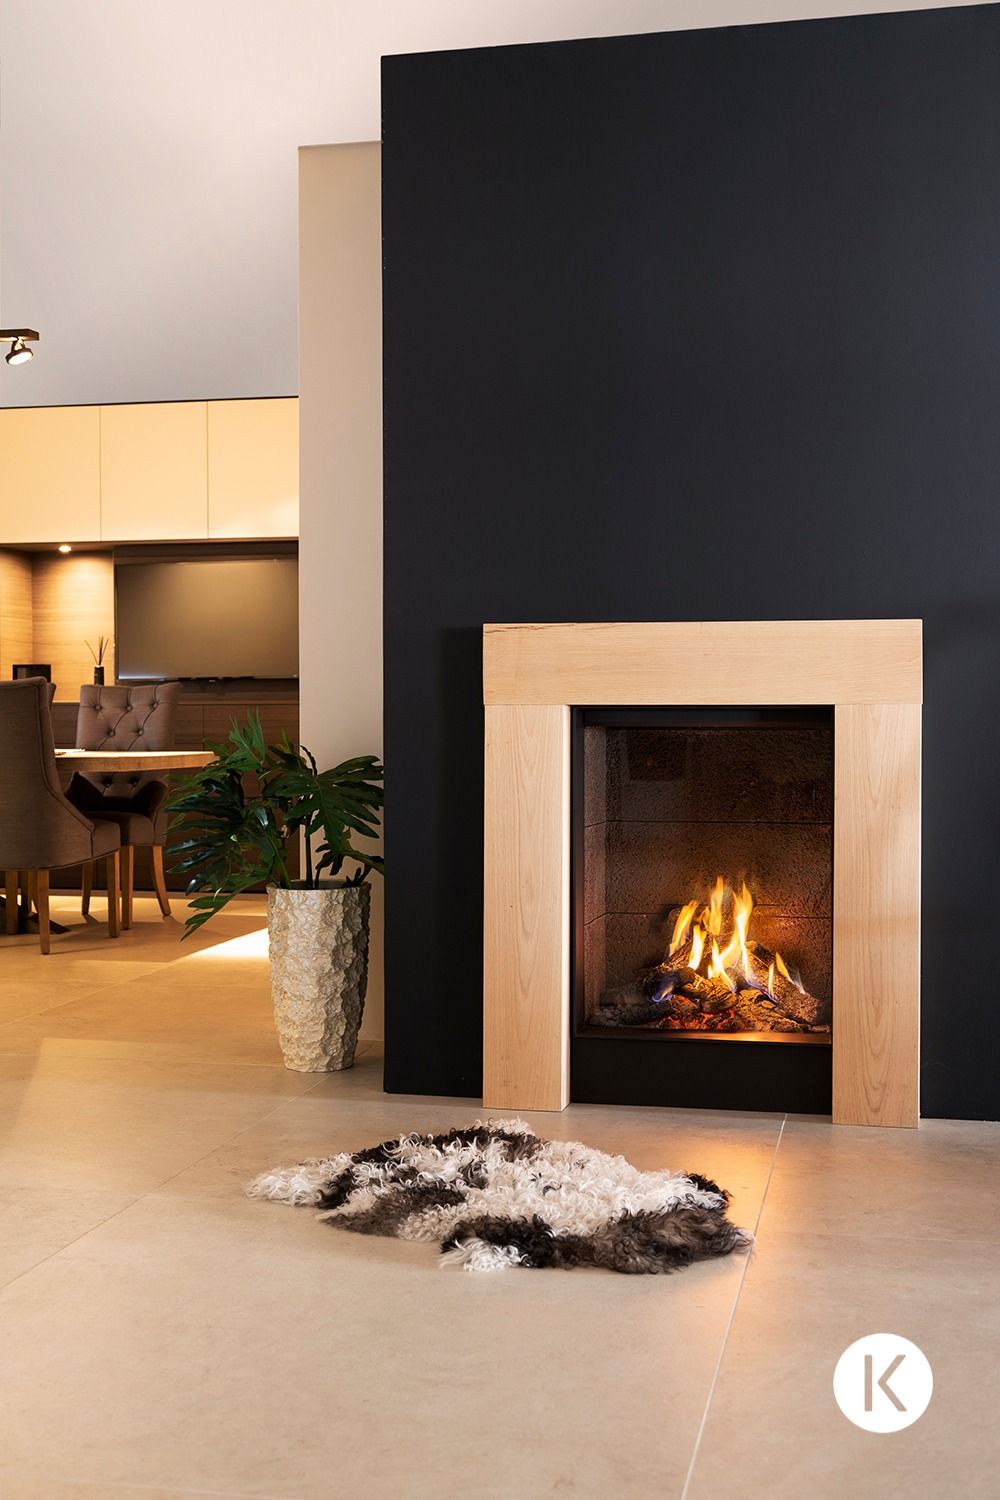 Stunning Gas Fireplace Ideas for Cozy and
Elegant Living Spaces